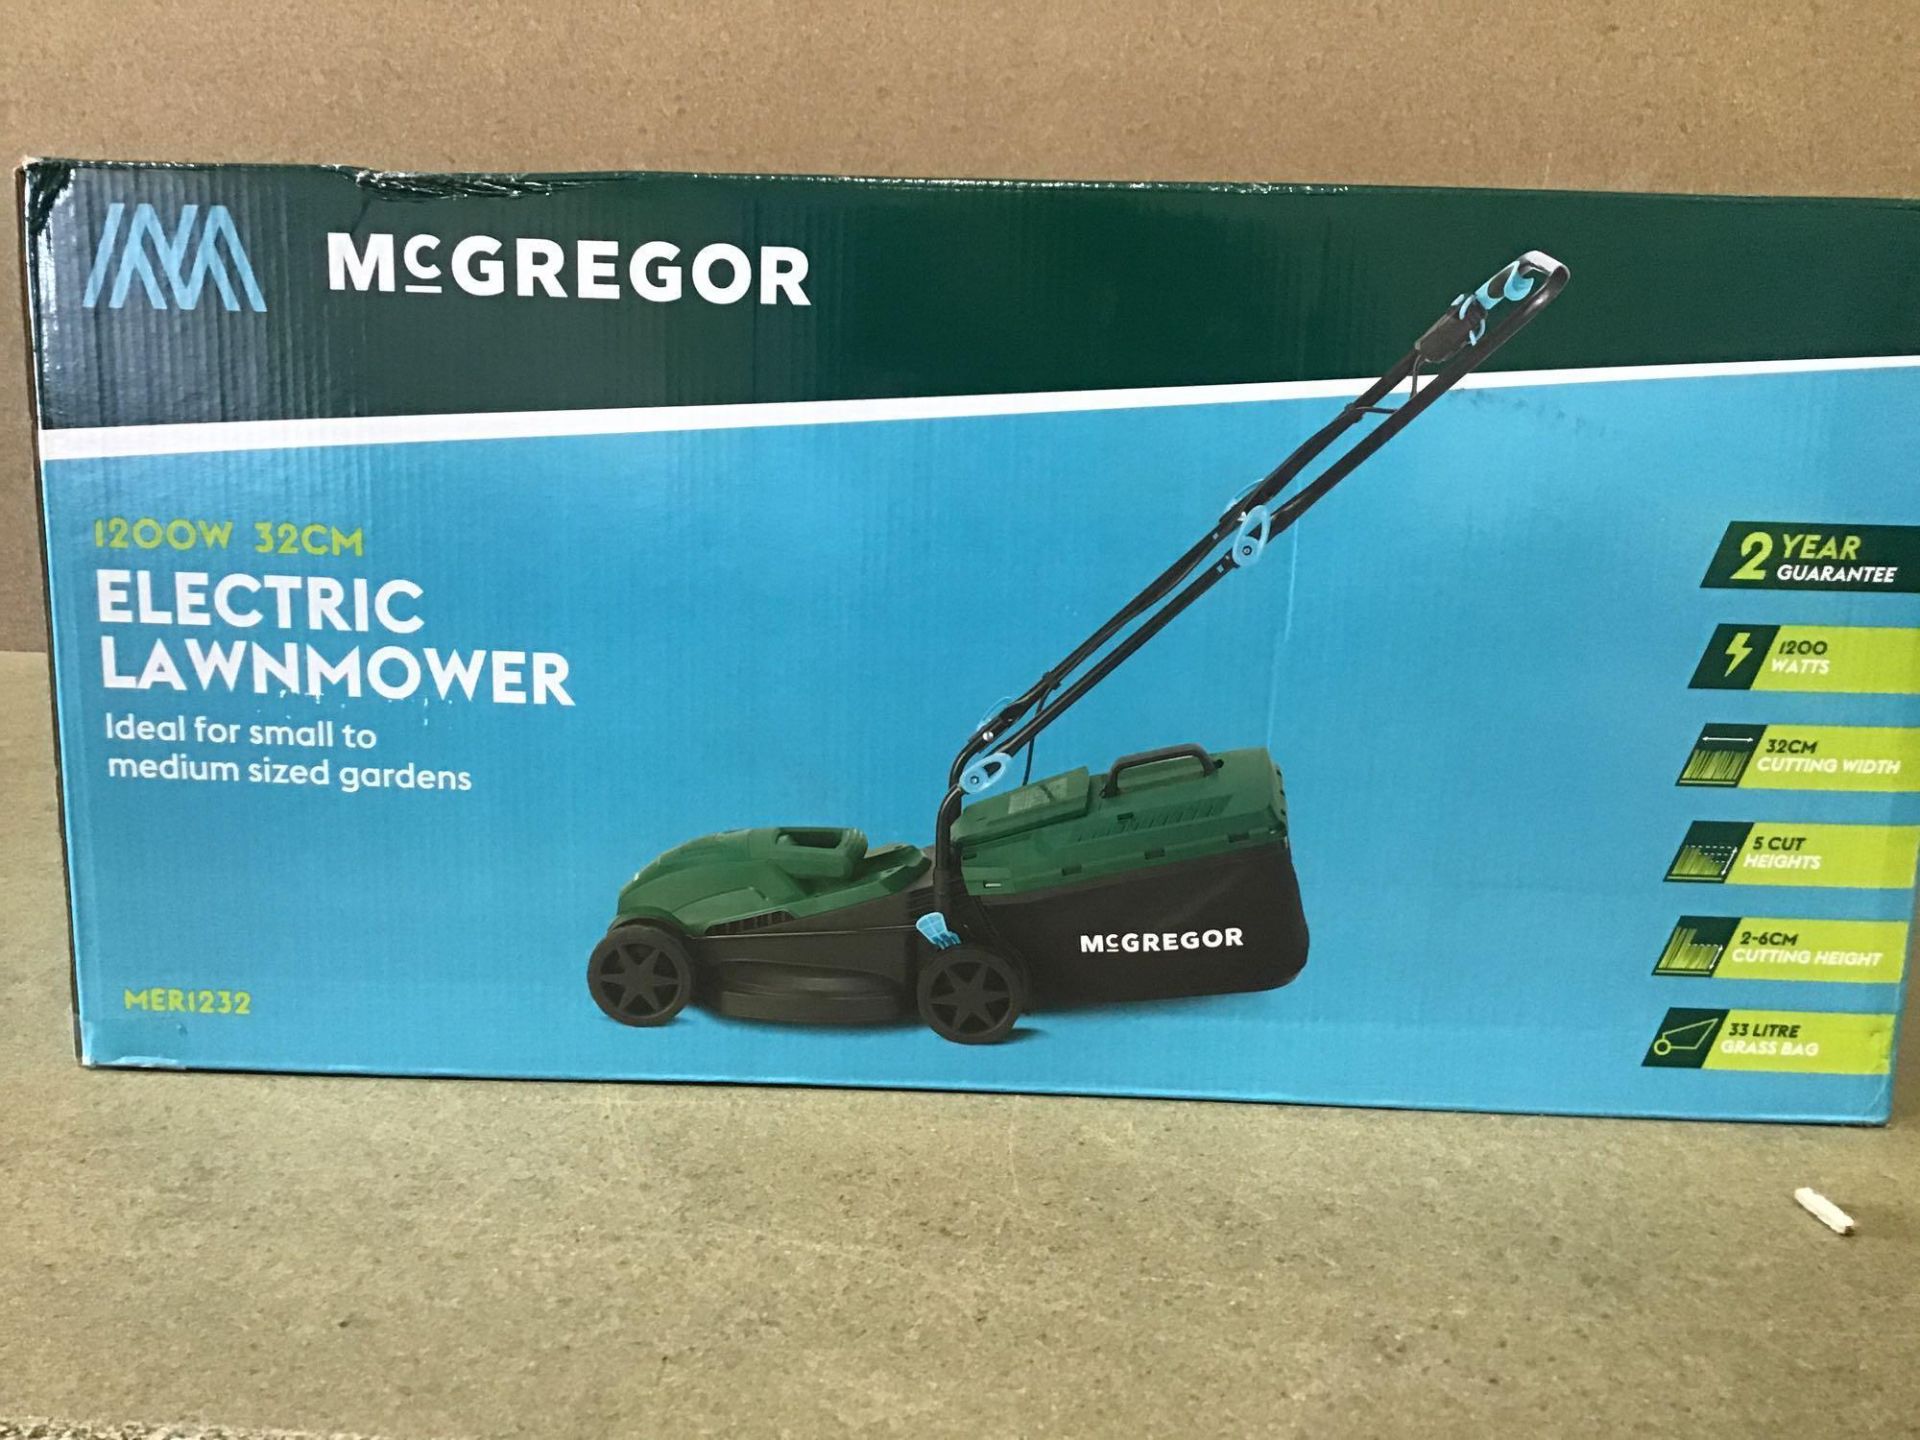 McGregor 32cm Corded Rotary Lawnmower - 1200W - £60.00 RRP - Image 2 of 3